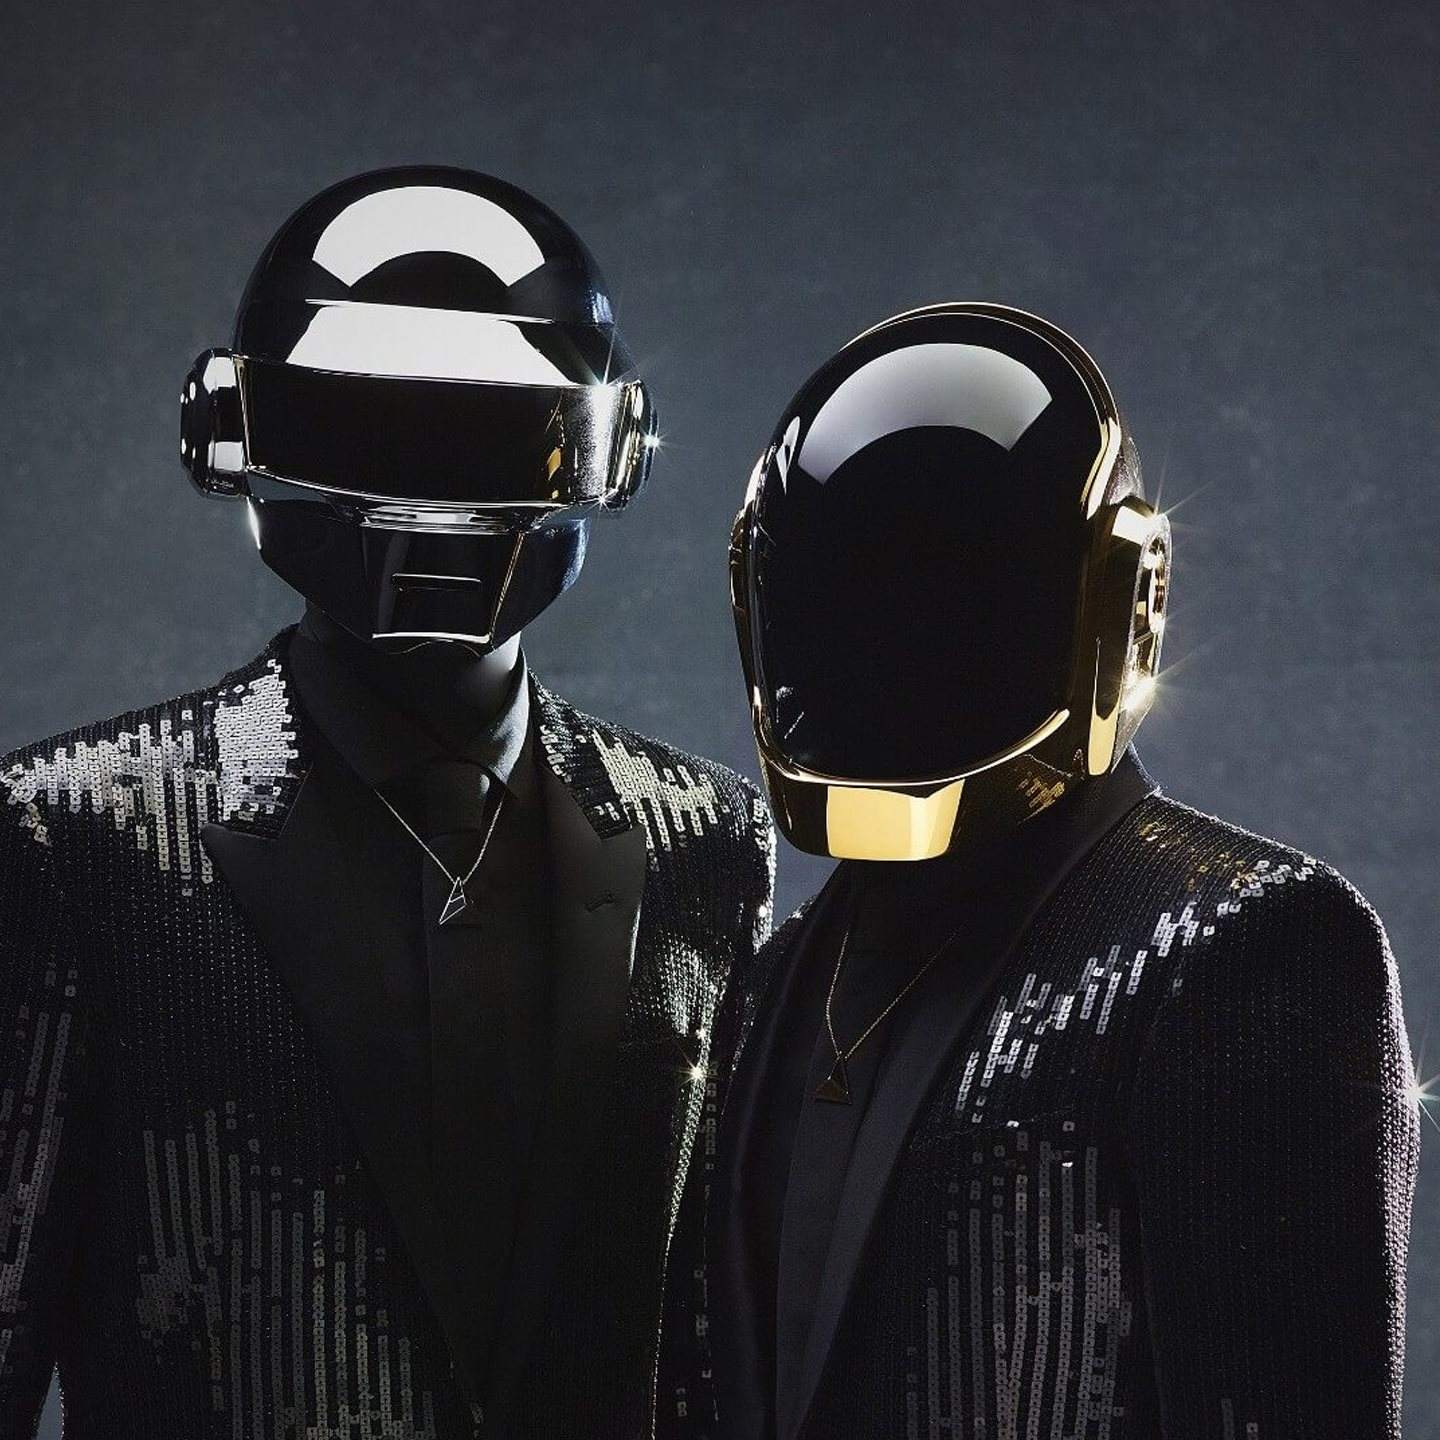 Dance act Daft Punk's latest album is a flashback to analog